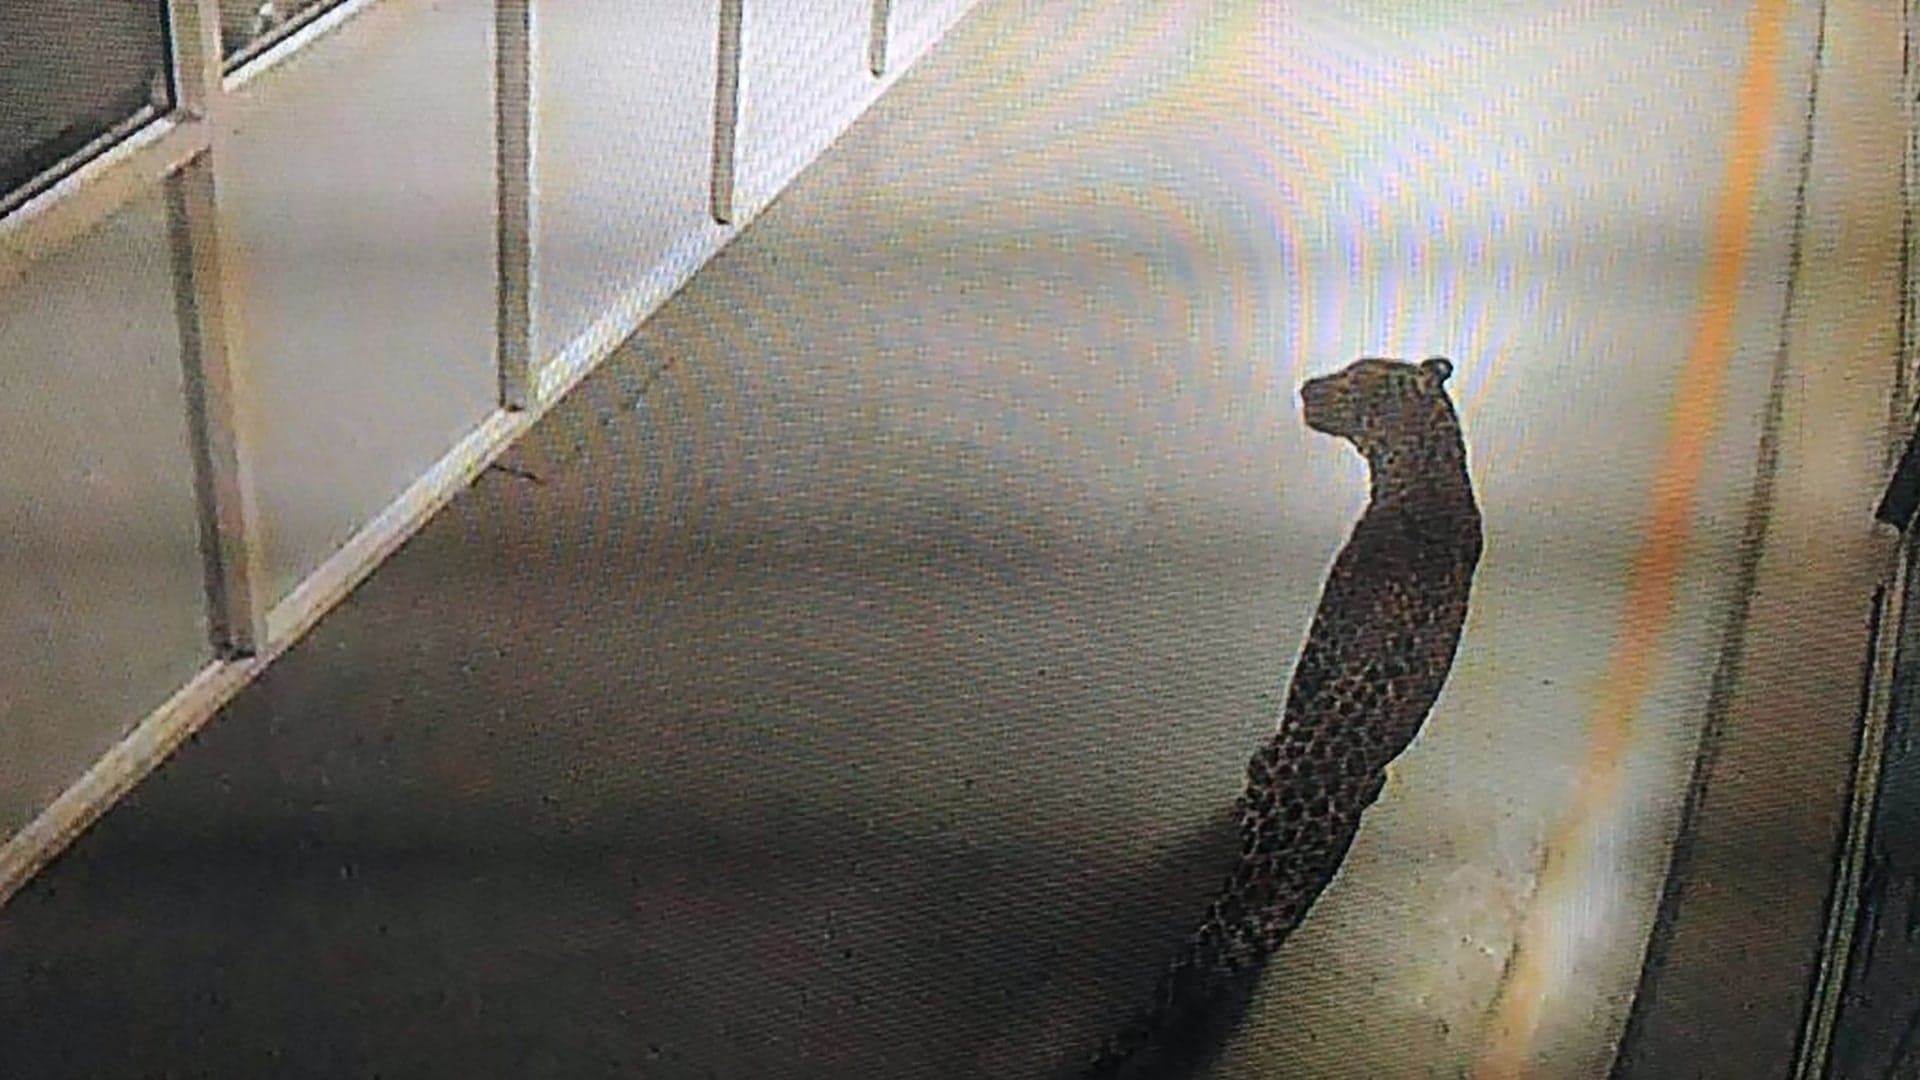 Leopard Caught in India’s Largest Car Factory After 36-Hour Chase